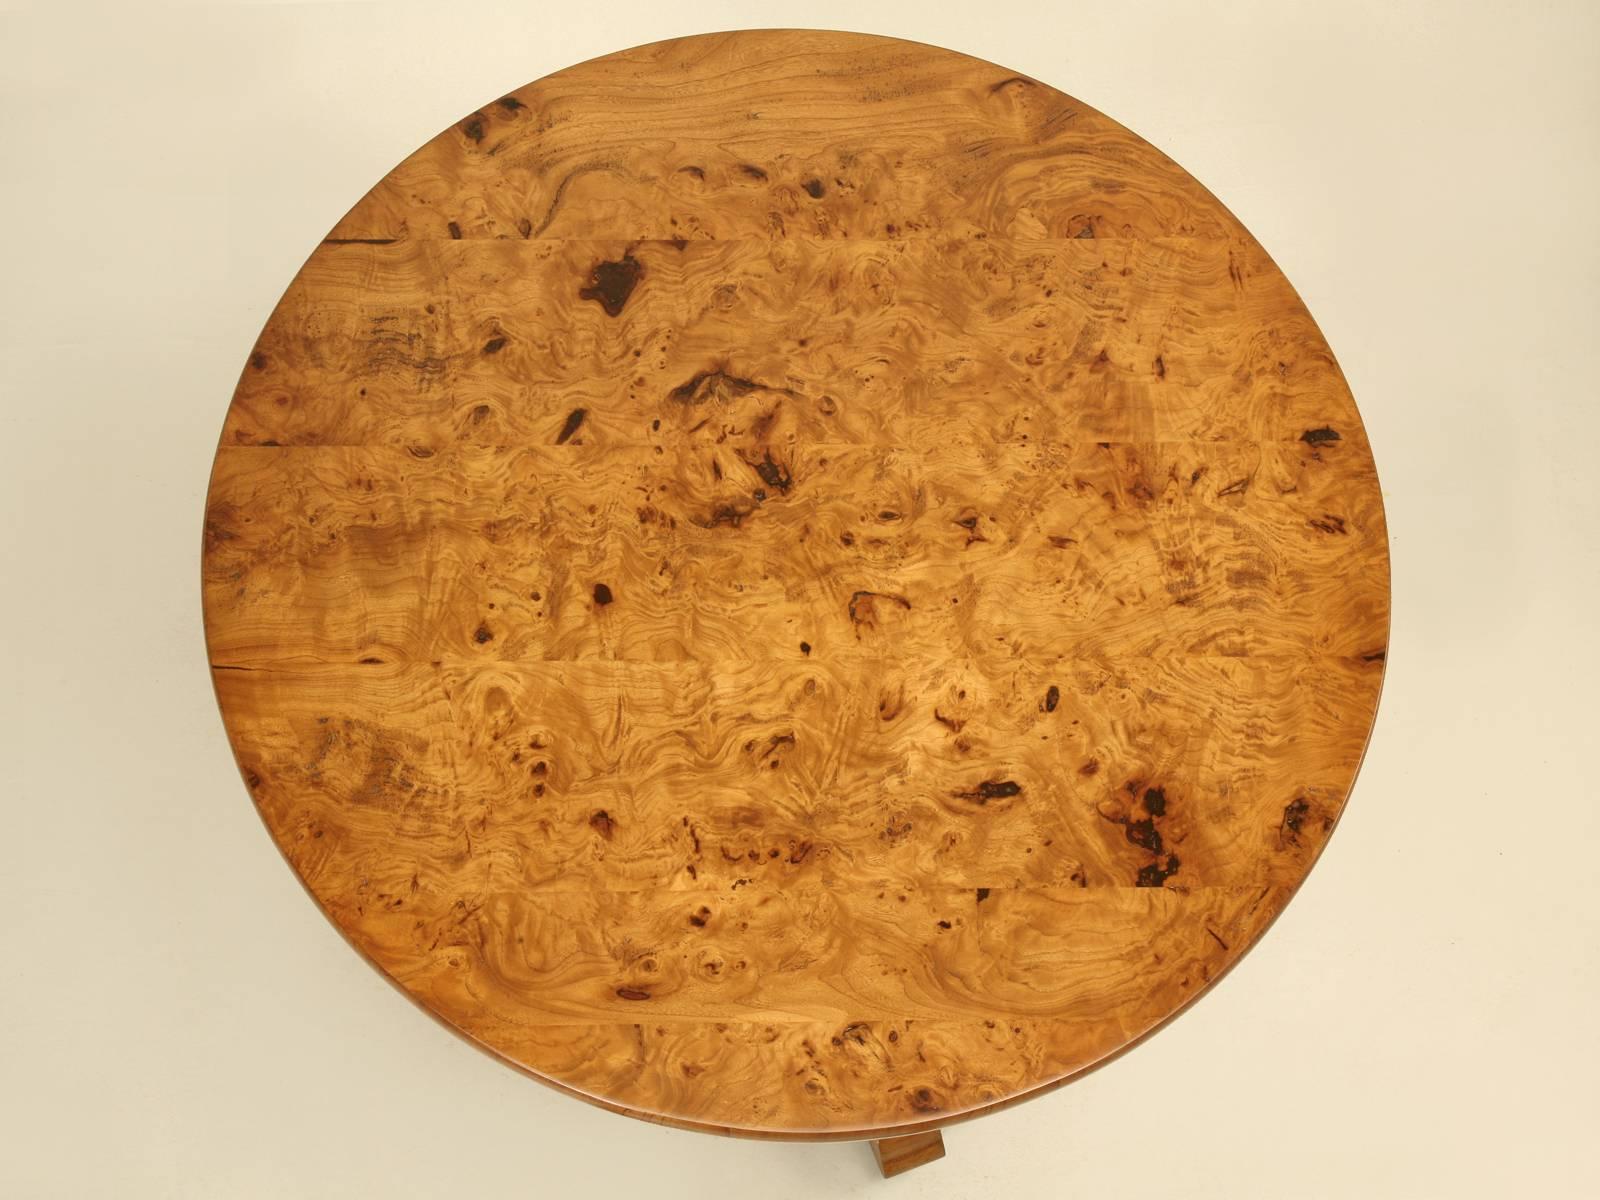 This is a perfect example of how you just cannot beat Mother Nature. The burl elmwood top is almost mesmerizing in its pure natural beauty and the longer you look, the more you fall in love with the intricate burling of the elm. Probably made in the